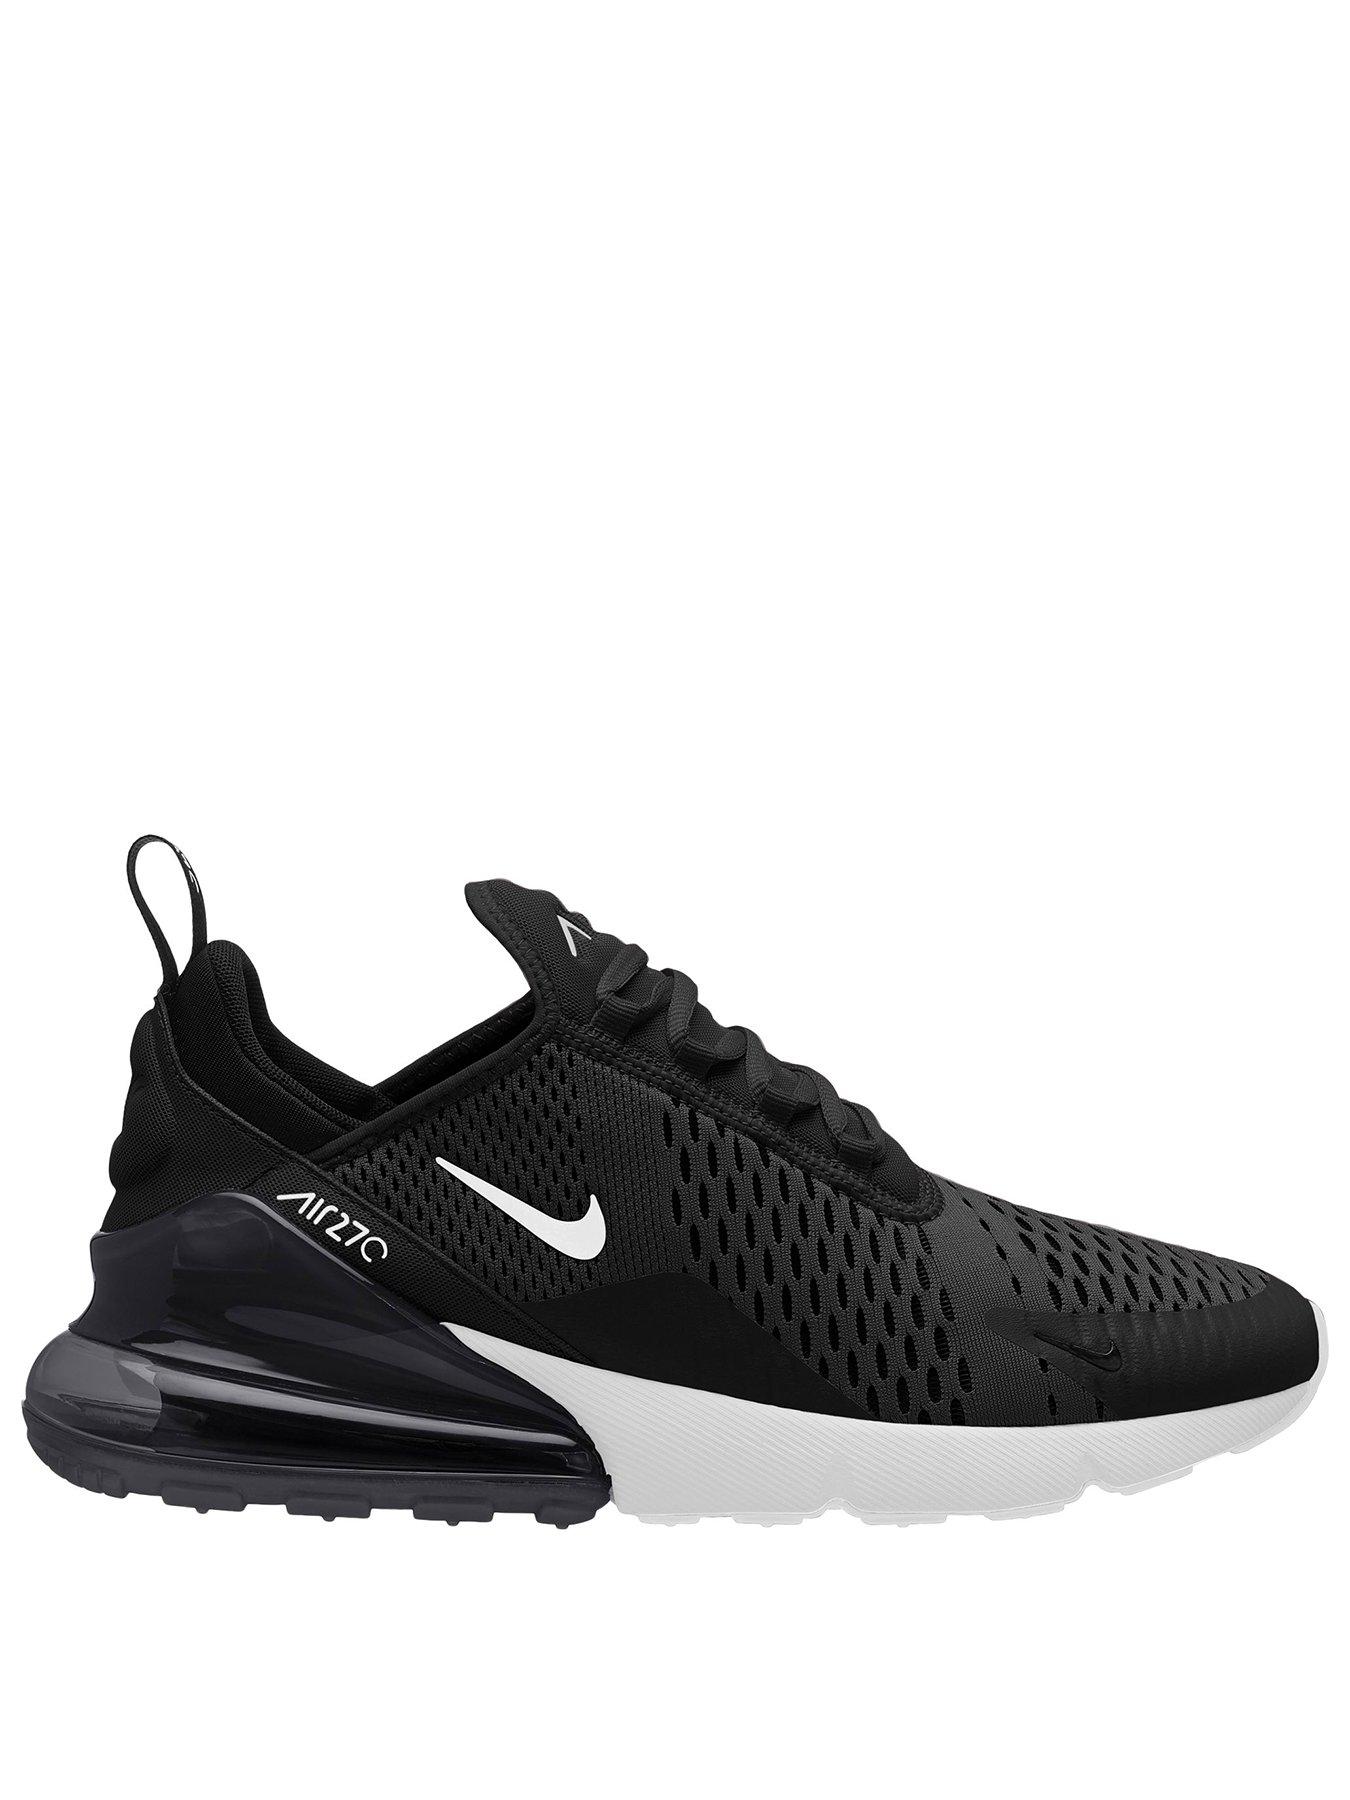 air max 270 size guide